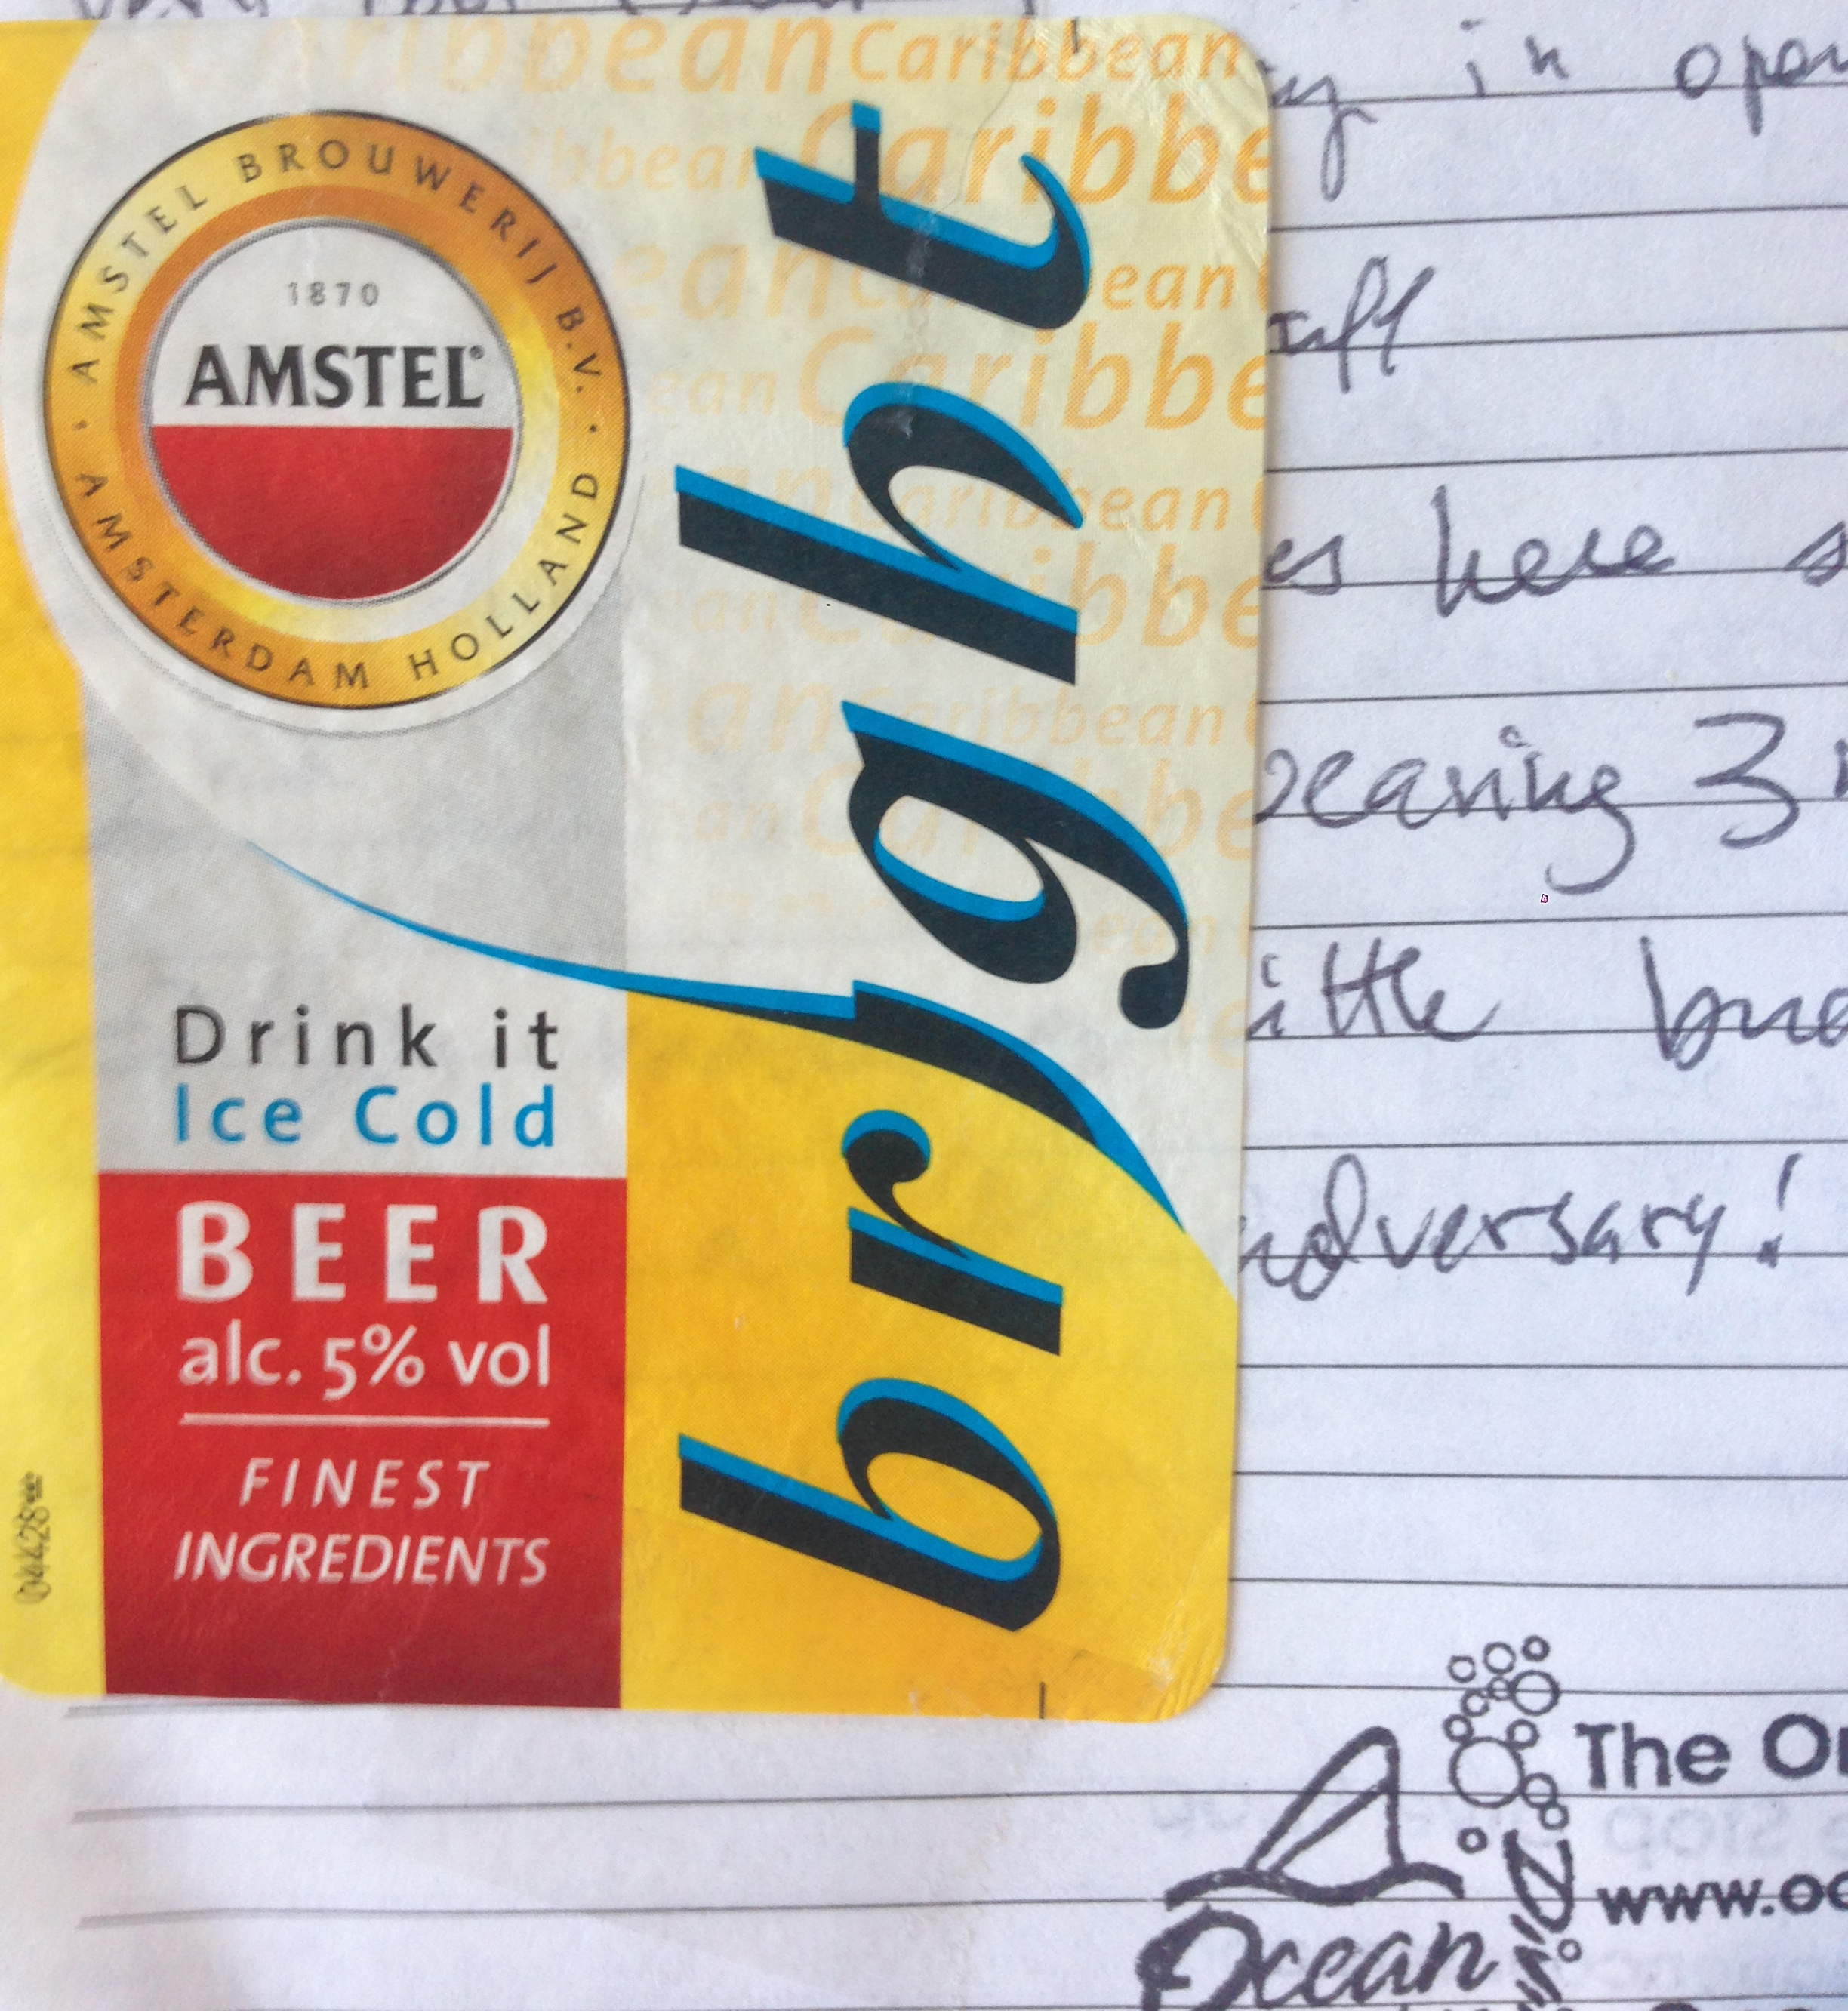 Yes, log books are for beer labels.